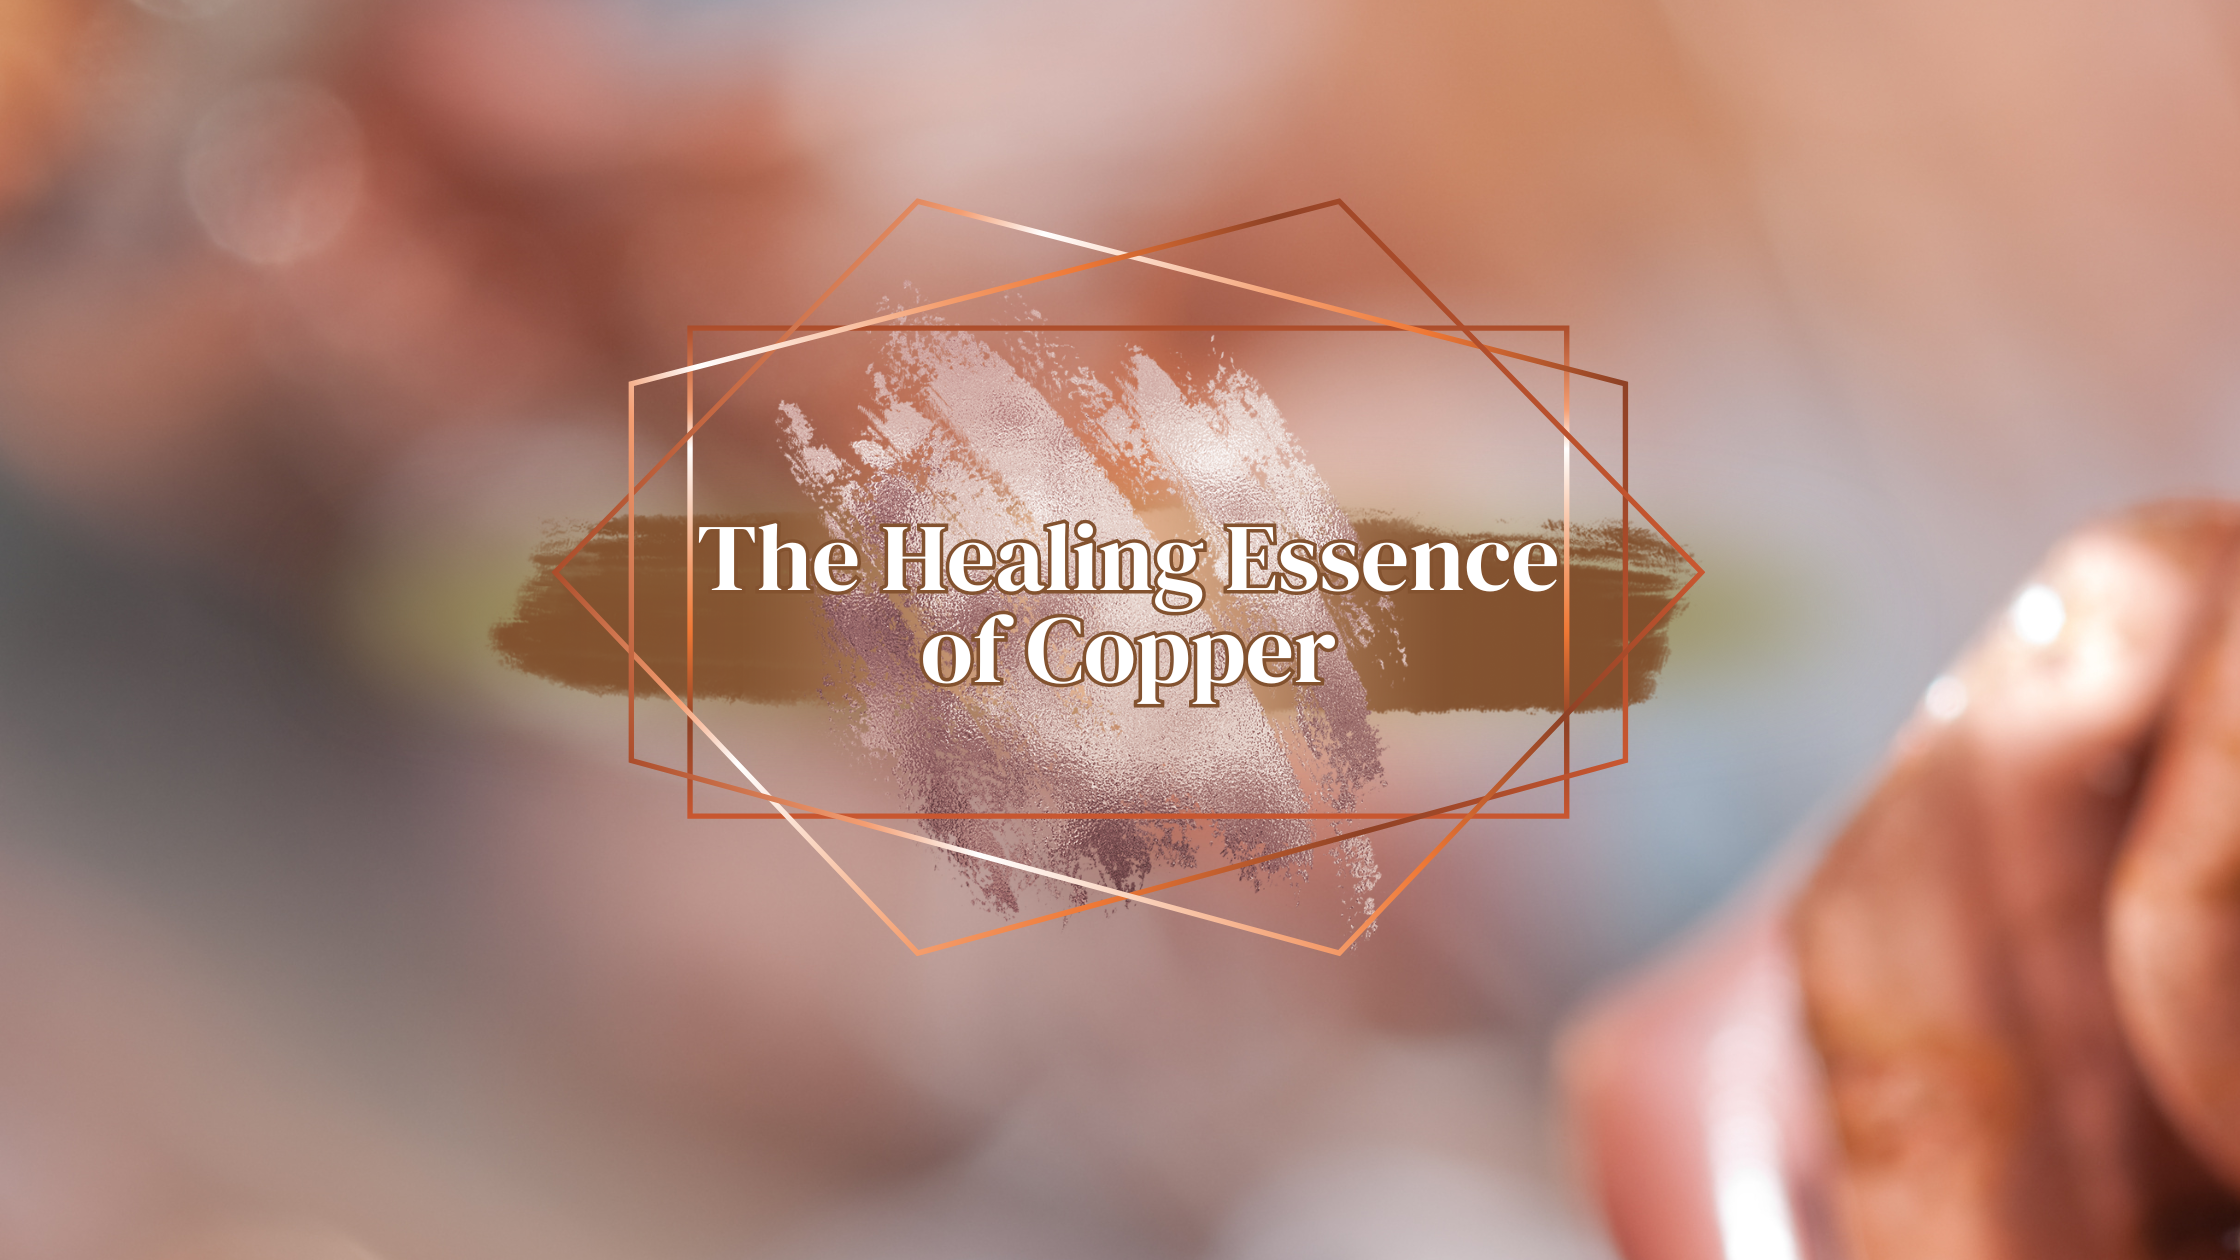 The Healing Essence of Copper